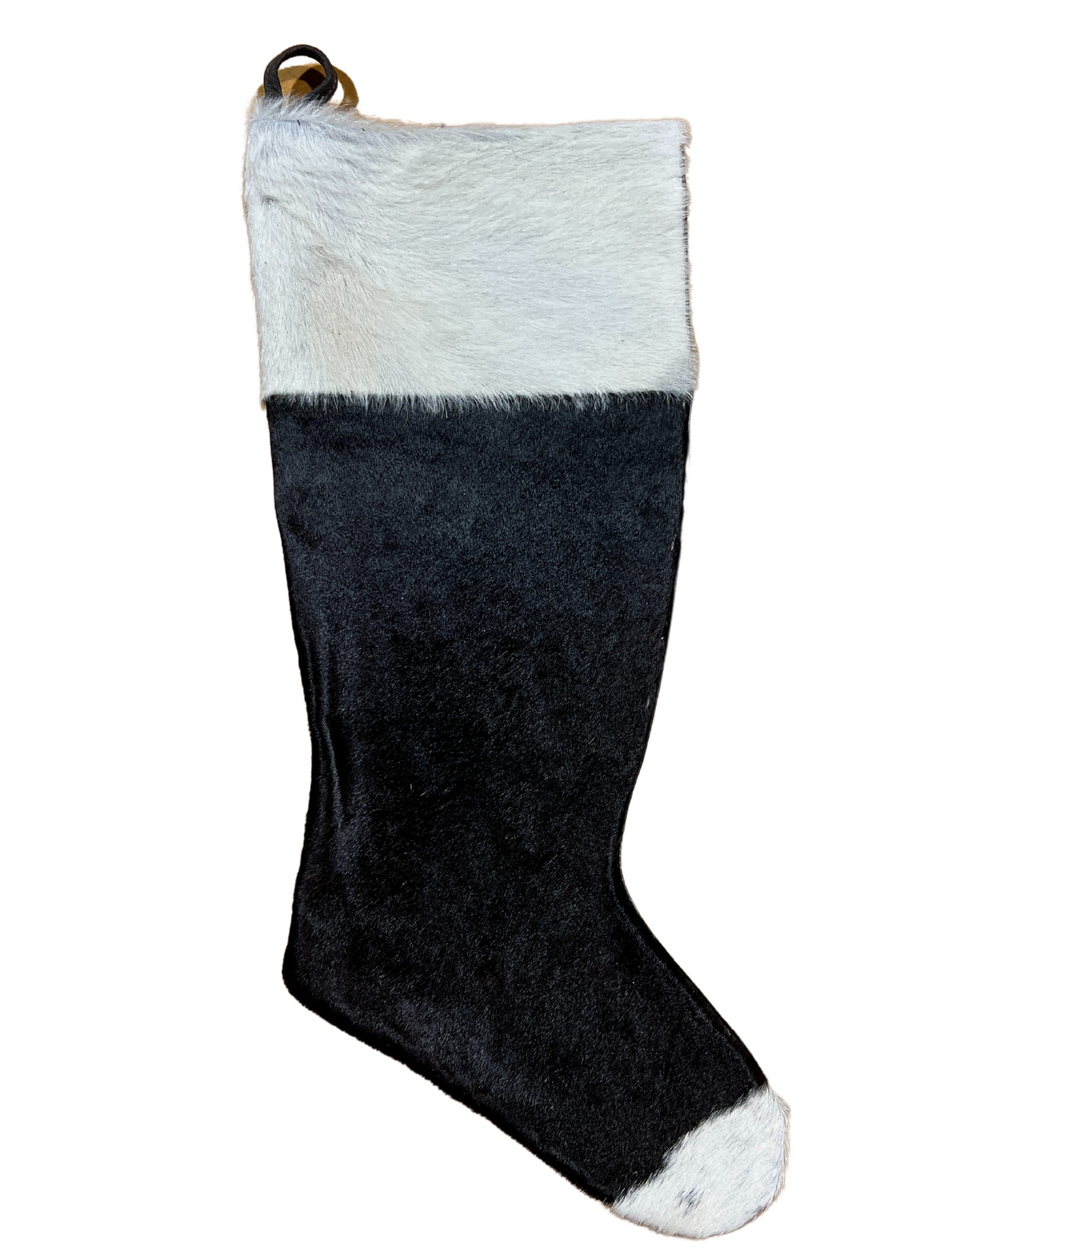 Black and White - Cowhide Christmas Stocking - Large